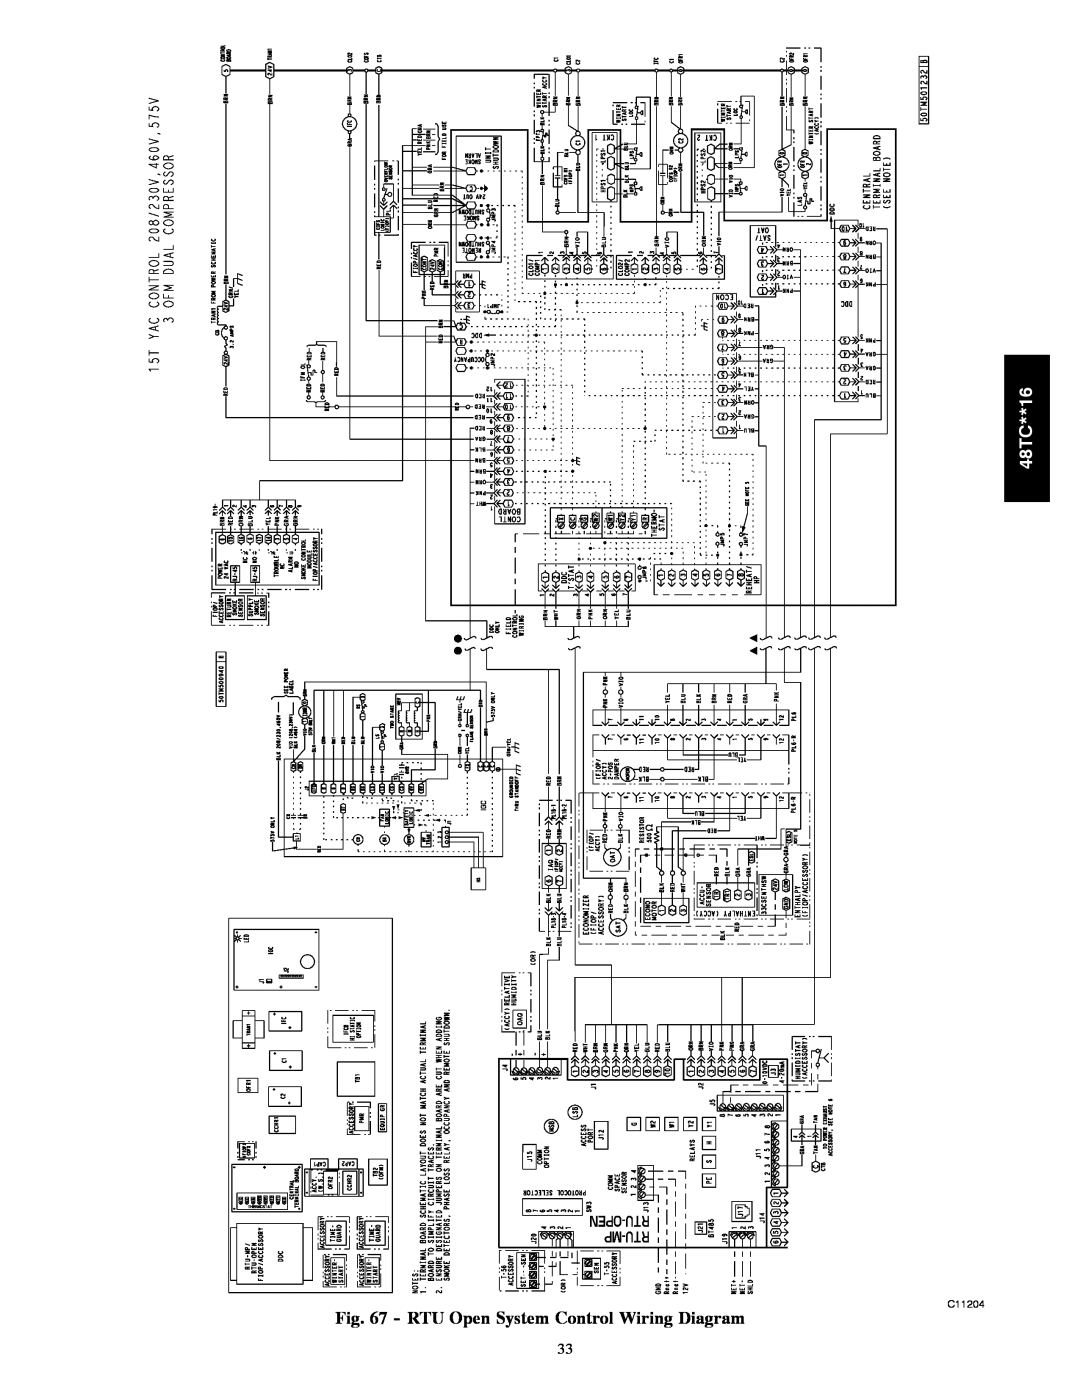 Carrier 48TC**16 installation instructions RTU Open System Control Wiring Diagram, C11204 